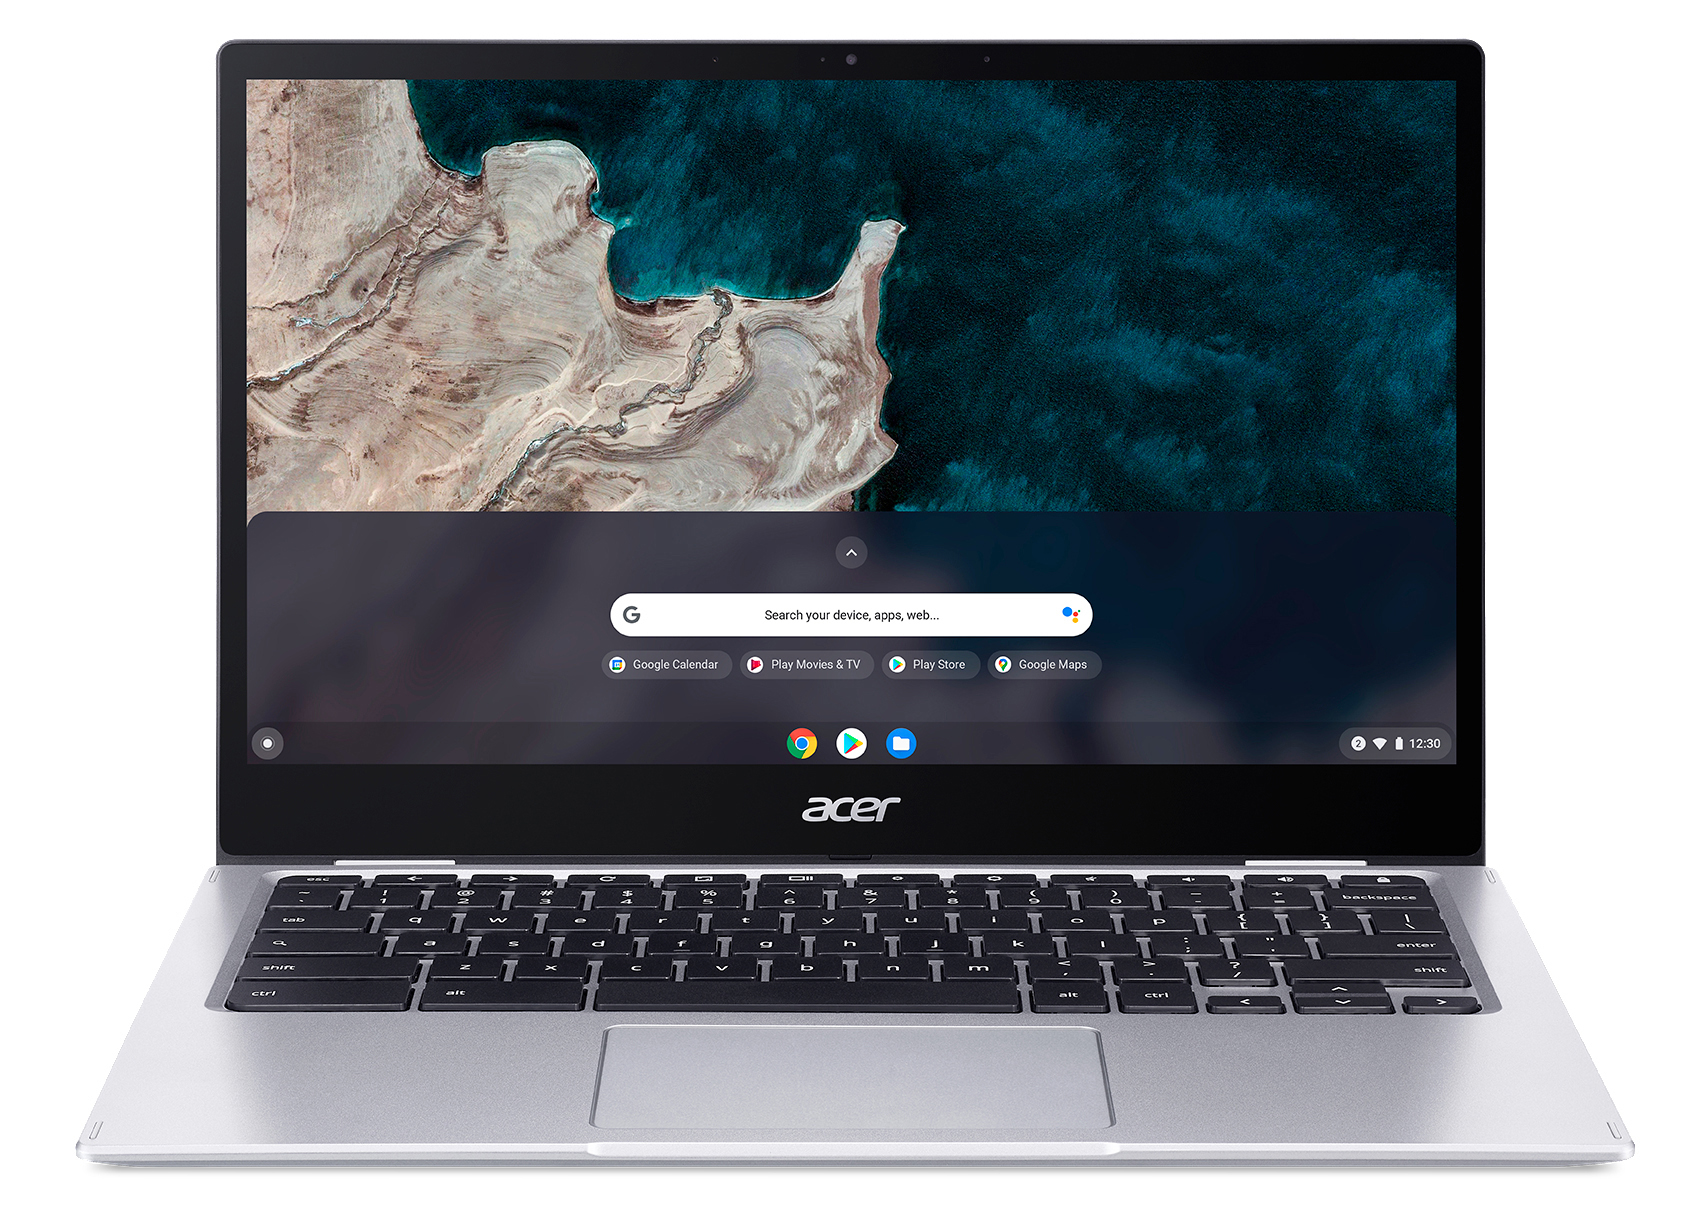 GB Tastaturbeleuchtung, Touchscreen, Chromebook, OS Display 7c Spin eMMC, Silber 4 Google RAM, 513 Onboard Zoll Chromebook 64 GB 13,3 Qualcomm mit Adreno™ (CP513-1H-S72Y) Graphics, Chrome ACER mit Prozessor,